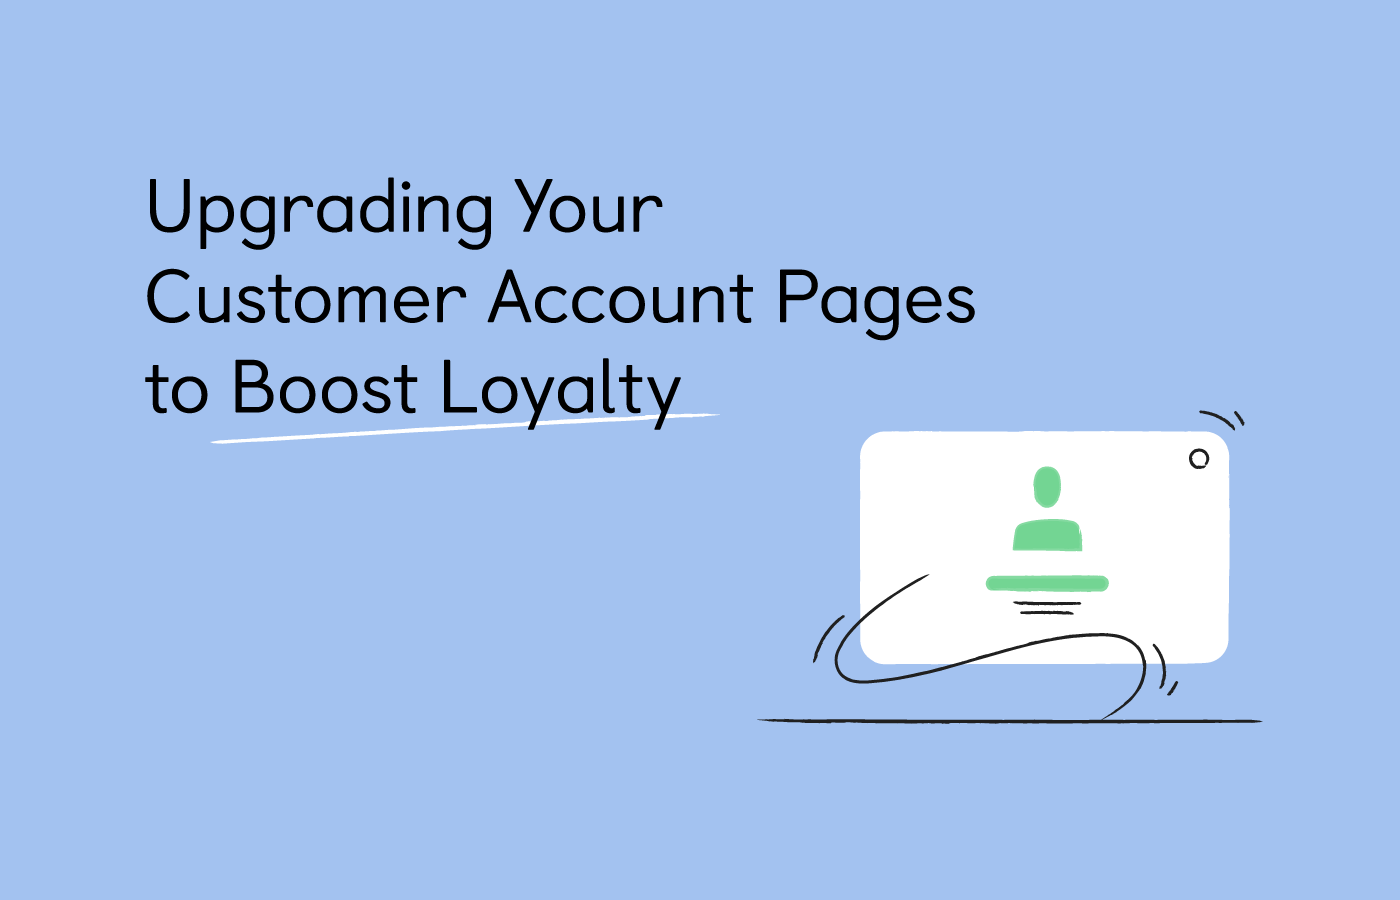 Importance of customer account pages and how they drive repeat purchases